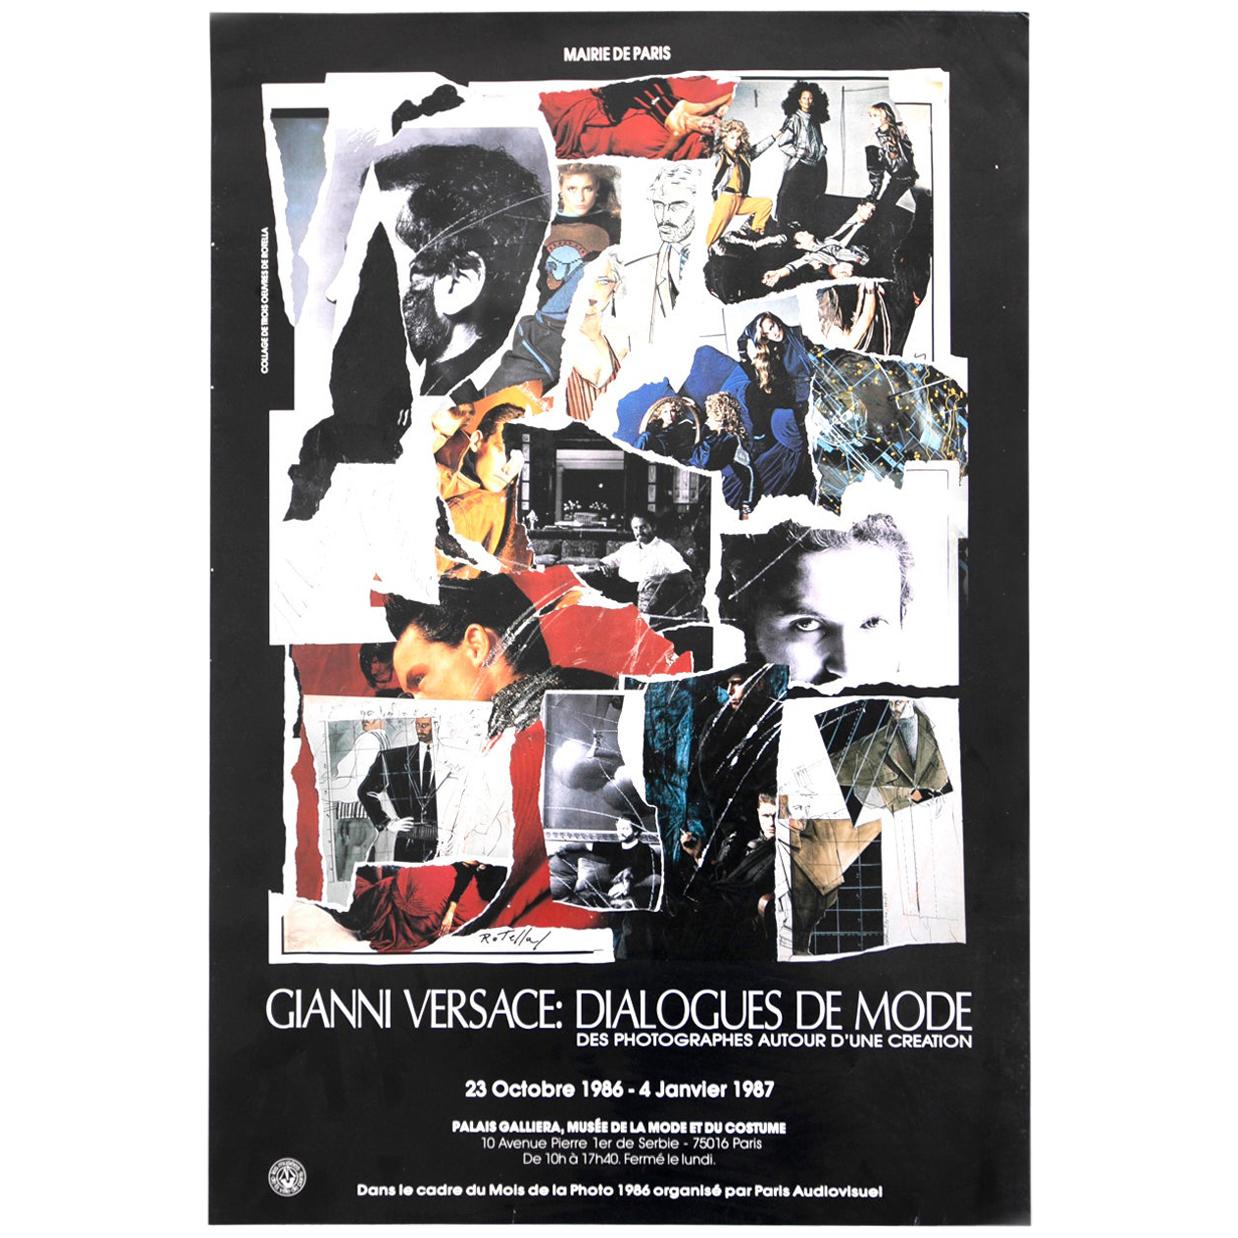 GIANNI VERSACE Poster created by Mimmo Rotella for Mostra Dialogue du Mode, 1987